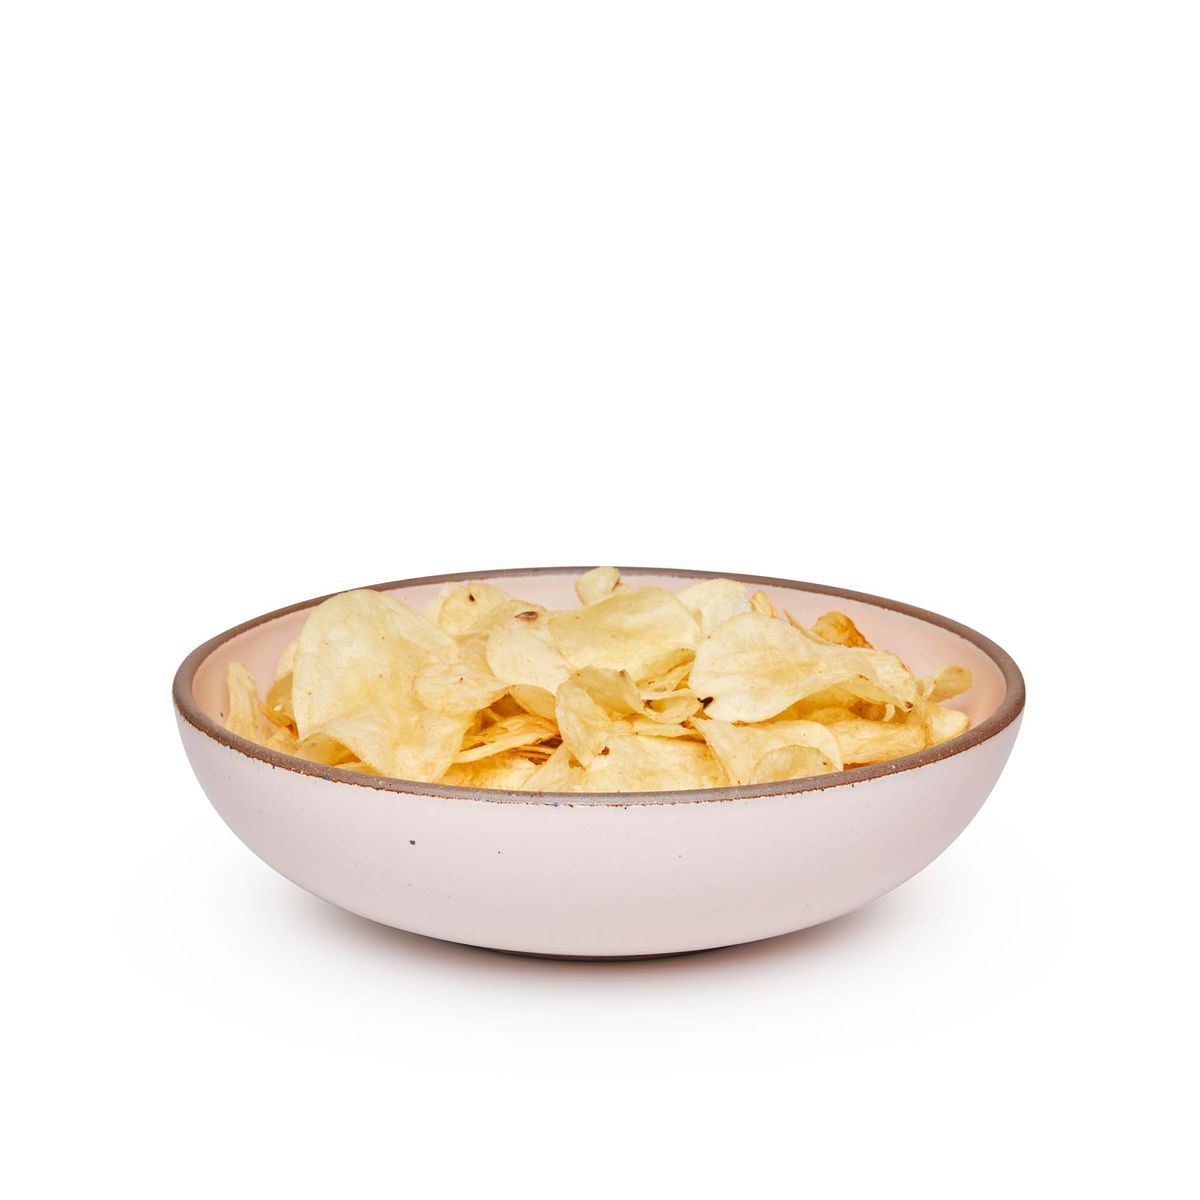 A large shallow serving ceramic bowl in a soft light pink color featuring iron speckles and an unglazed rim, filled with potato chips